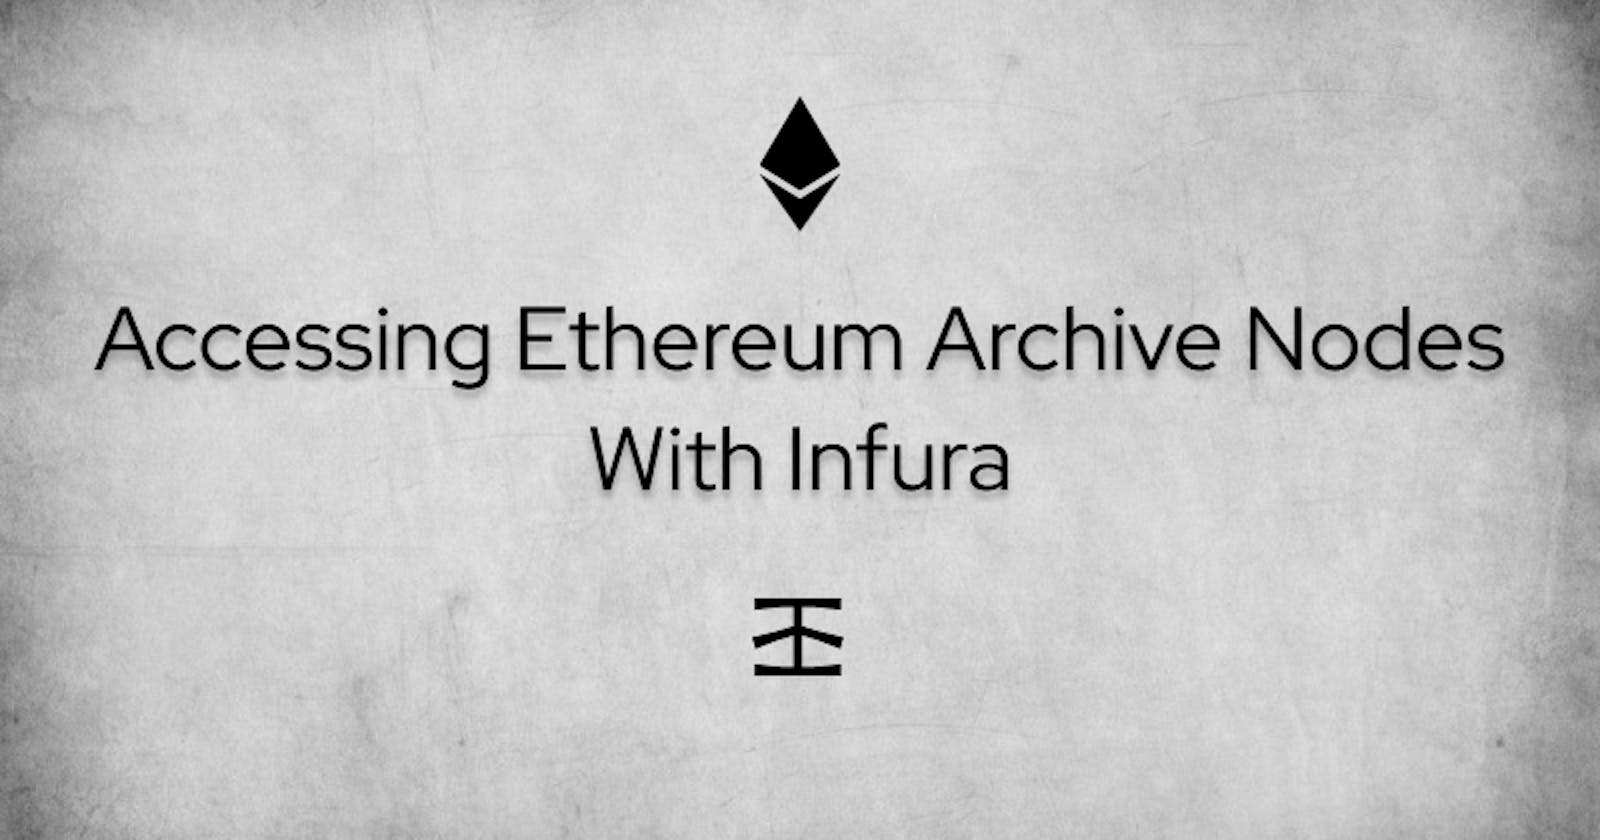 Accessing Ethereum Archive Nodes With Infura